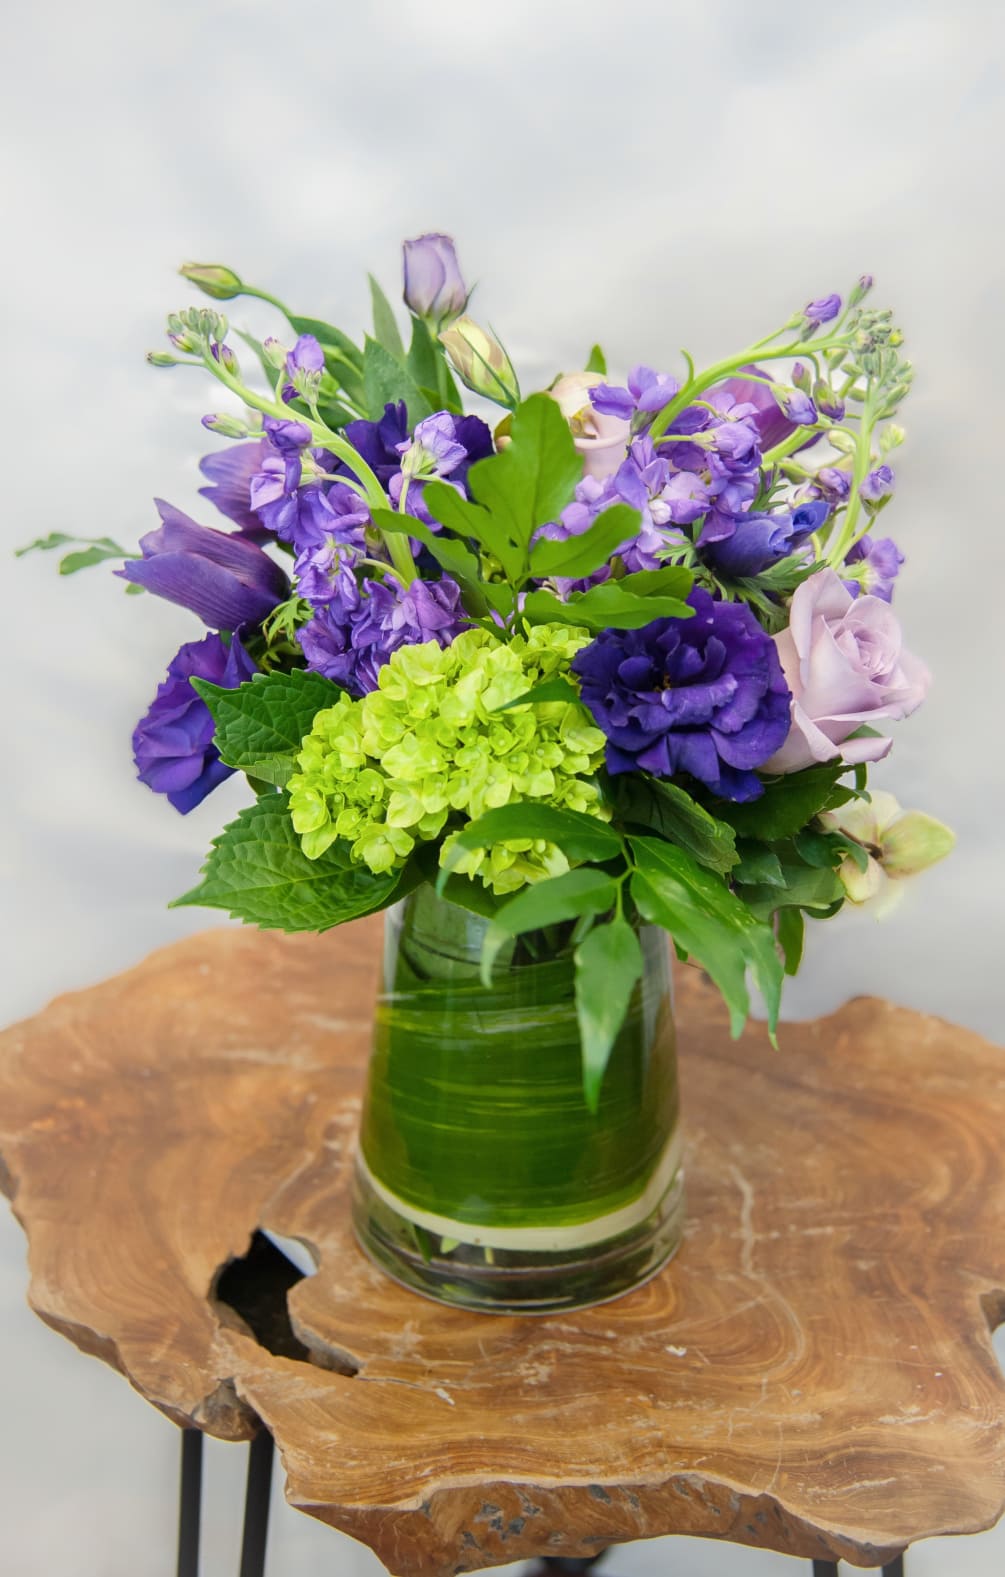 Beautiful purple anemones, green hydrangea, and stock provides a beautiful as well